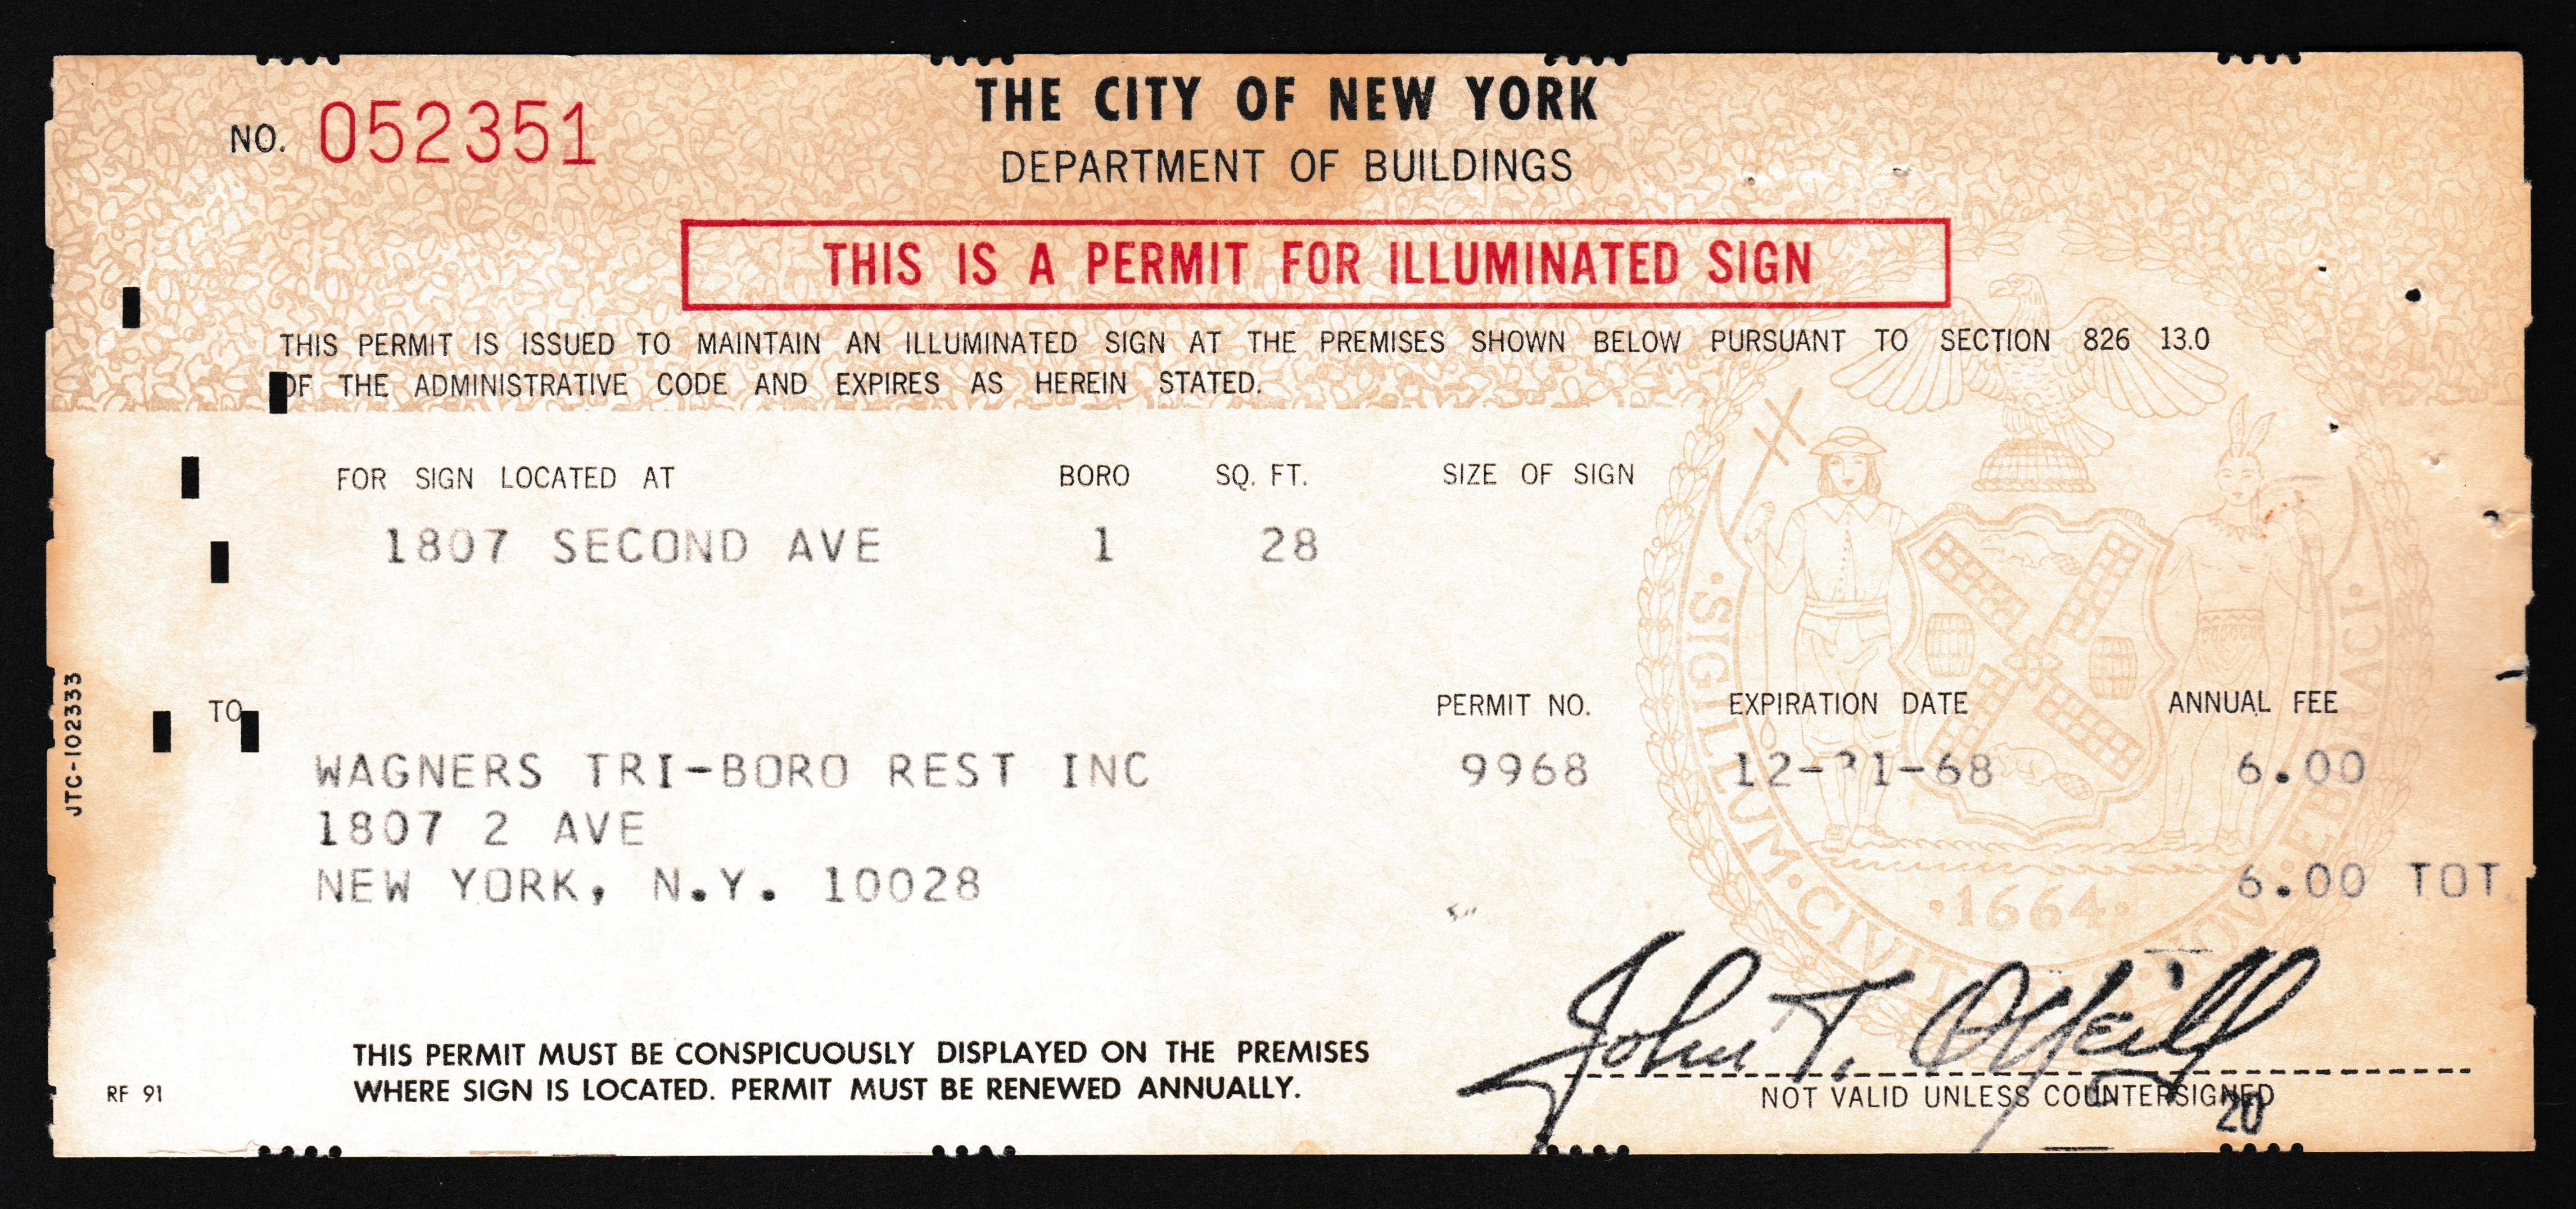 NY permit Group of 5 NYC permits for Illuminated Sign, 1968, 71, 73, 78, & 79, all from same business WP